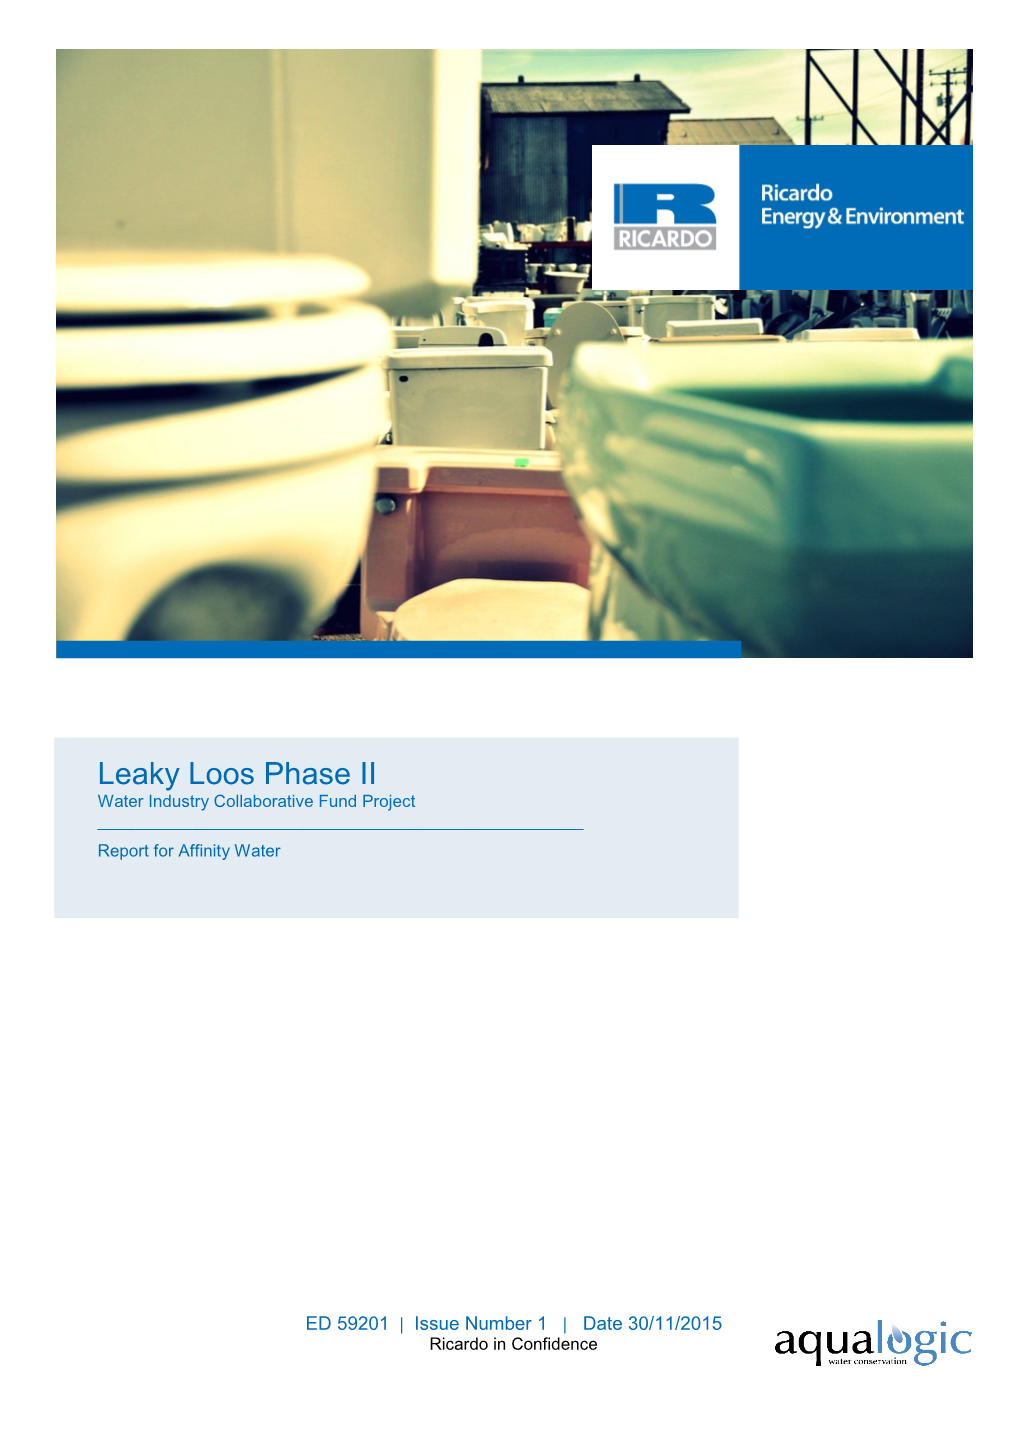 Leaky Loos Phase II Water Industry Collaborative Fund Project ______Report for Affinity Water